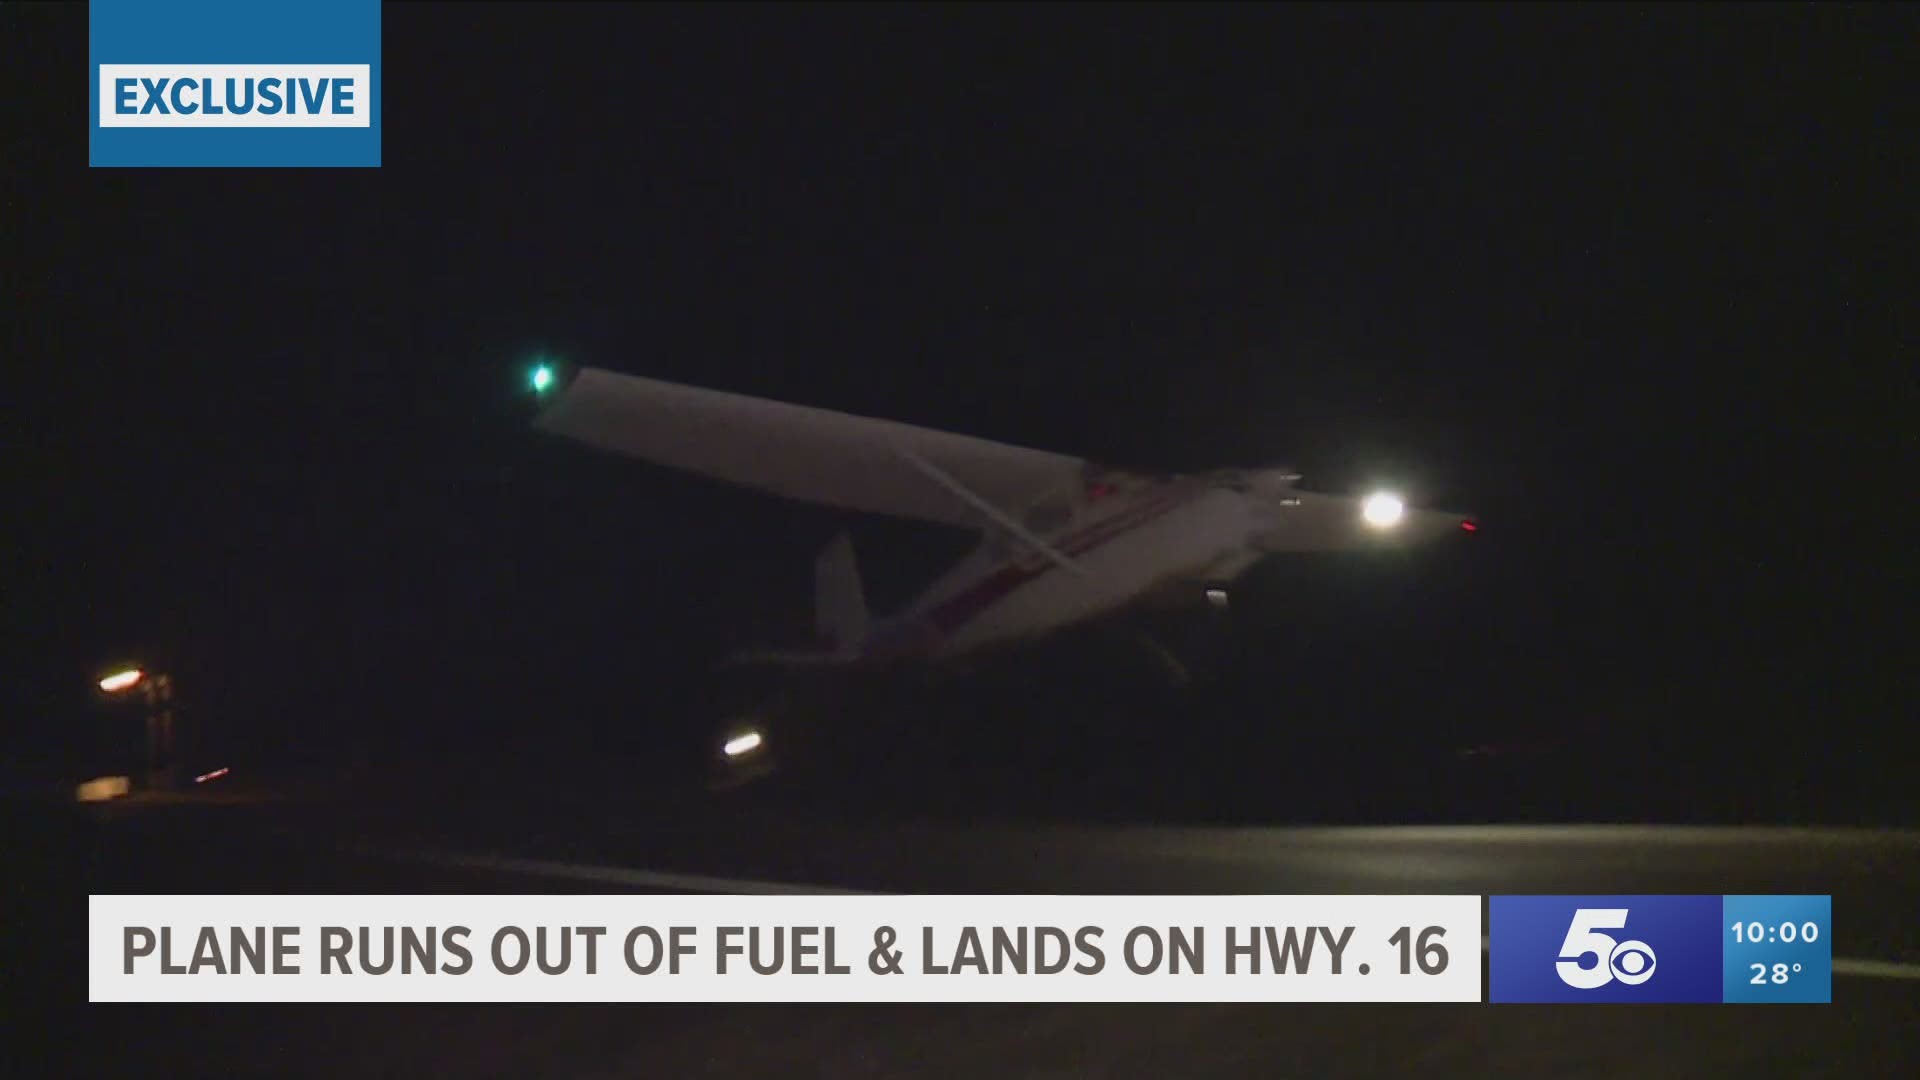 A pilot made an emergency landing after running out of fuel in Elkins Wednesday (Feb. 26). Police shut down a section of Highway 16 to allow space for a takeoff.